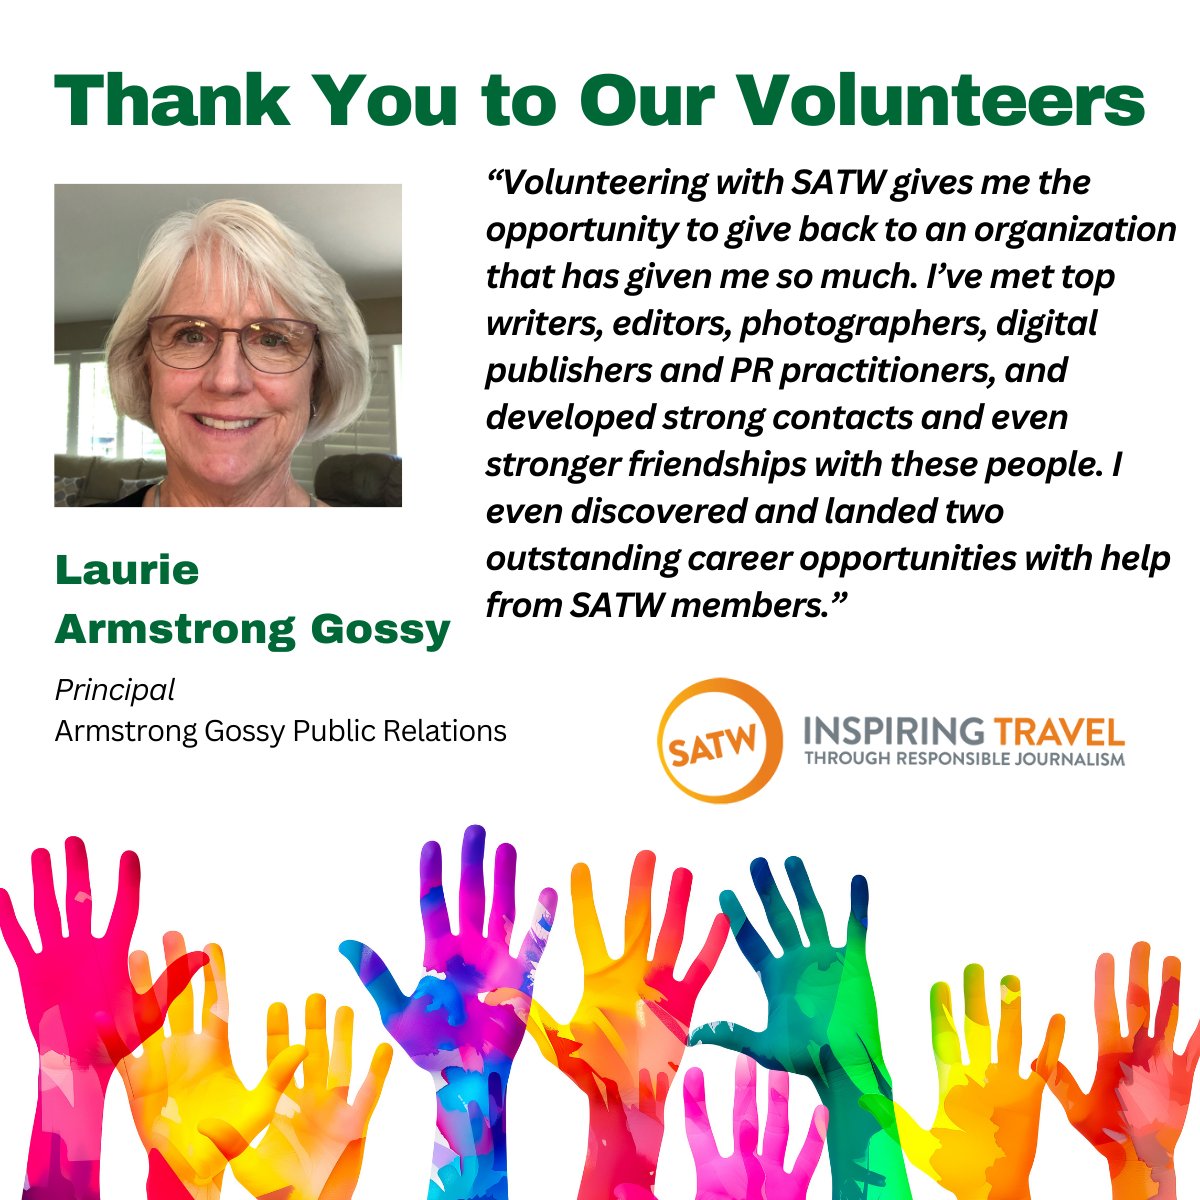 Laurie Armstrong Gossy volunteers with SATW because it allows her to give back, meet other industry leading professionals & even land new career opportunities. Thank you, Laurie, for all you do!

#NationalVolunteerWeek #TravelWriting #TravelBlogging #Travel